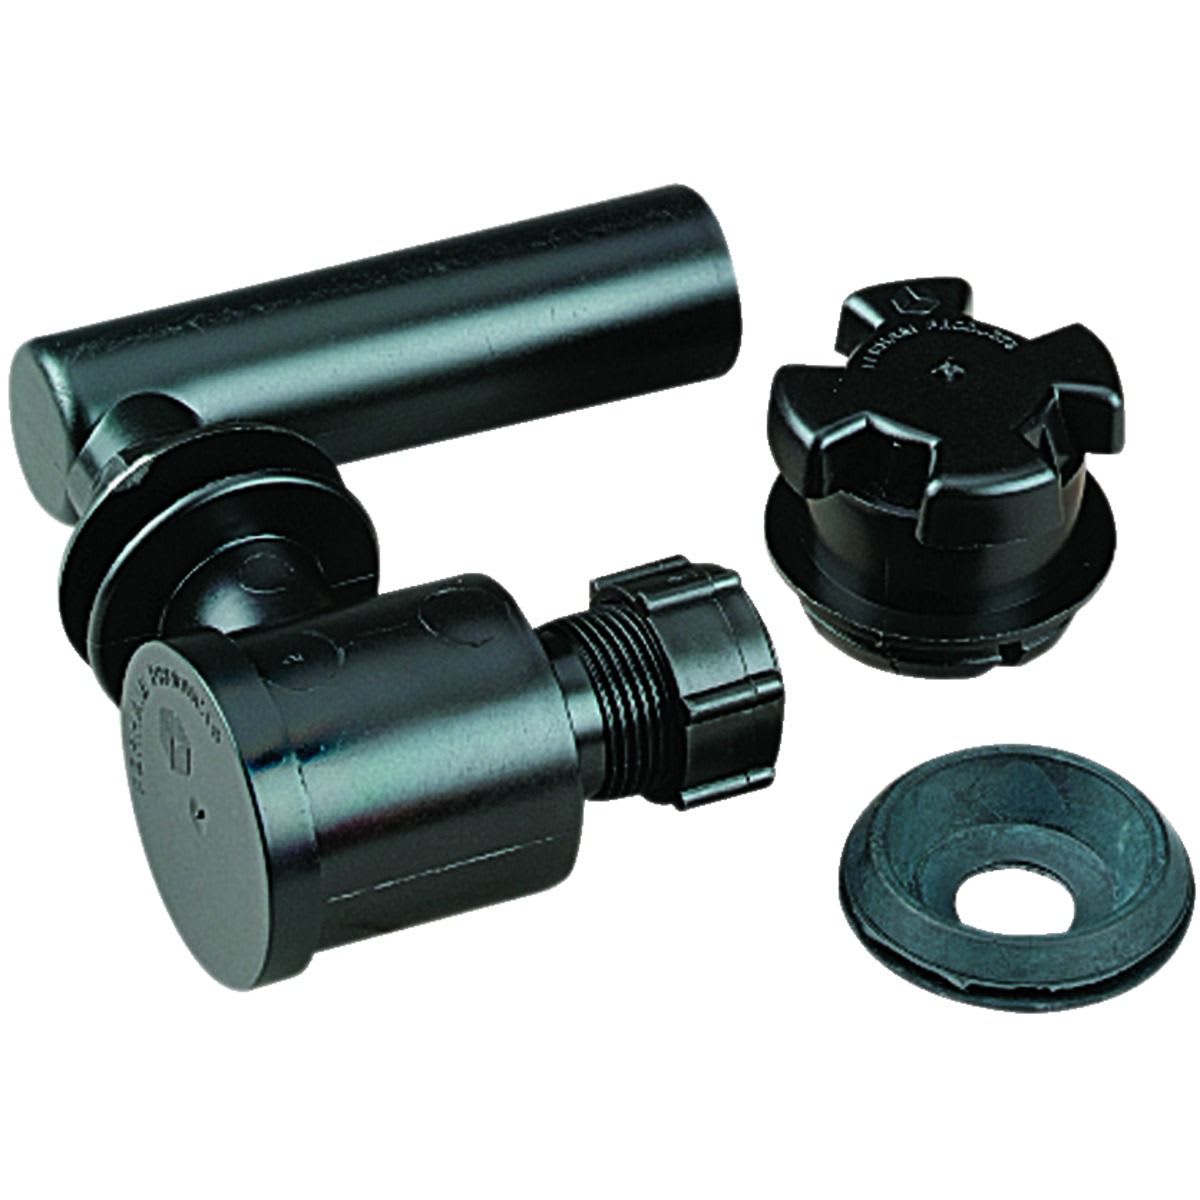 Wickes Black Byelaw 30 Cold Water Tank Fitting